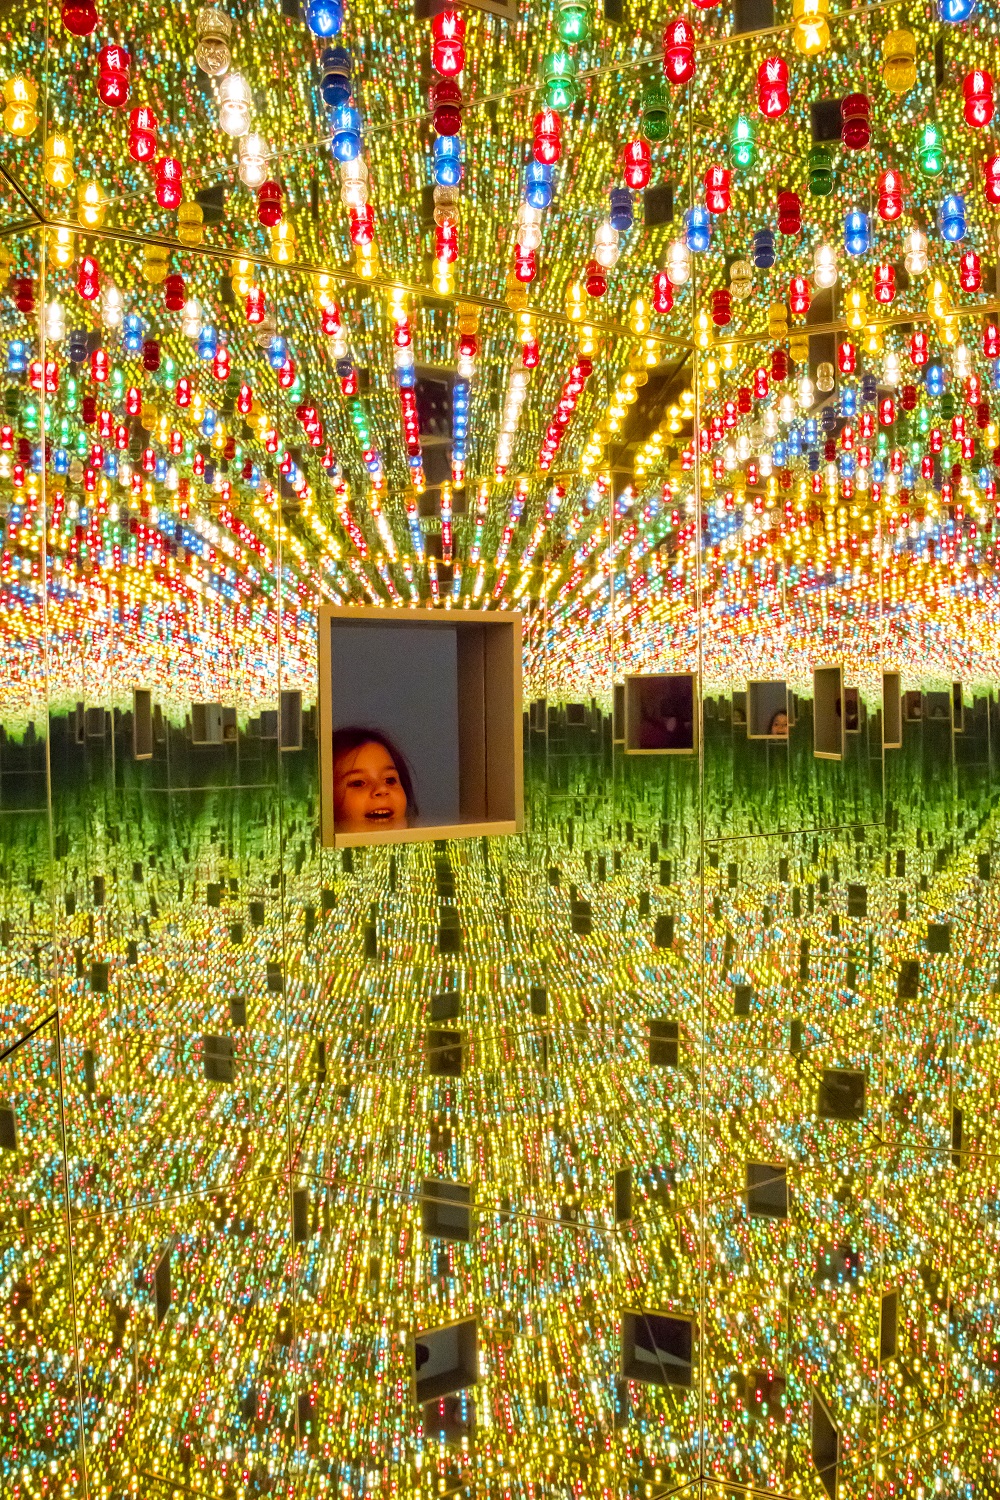 A small child's face peers through one of the peep holes in Yayoi Kusama's Infinity Mirror Room "Love Forever."